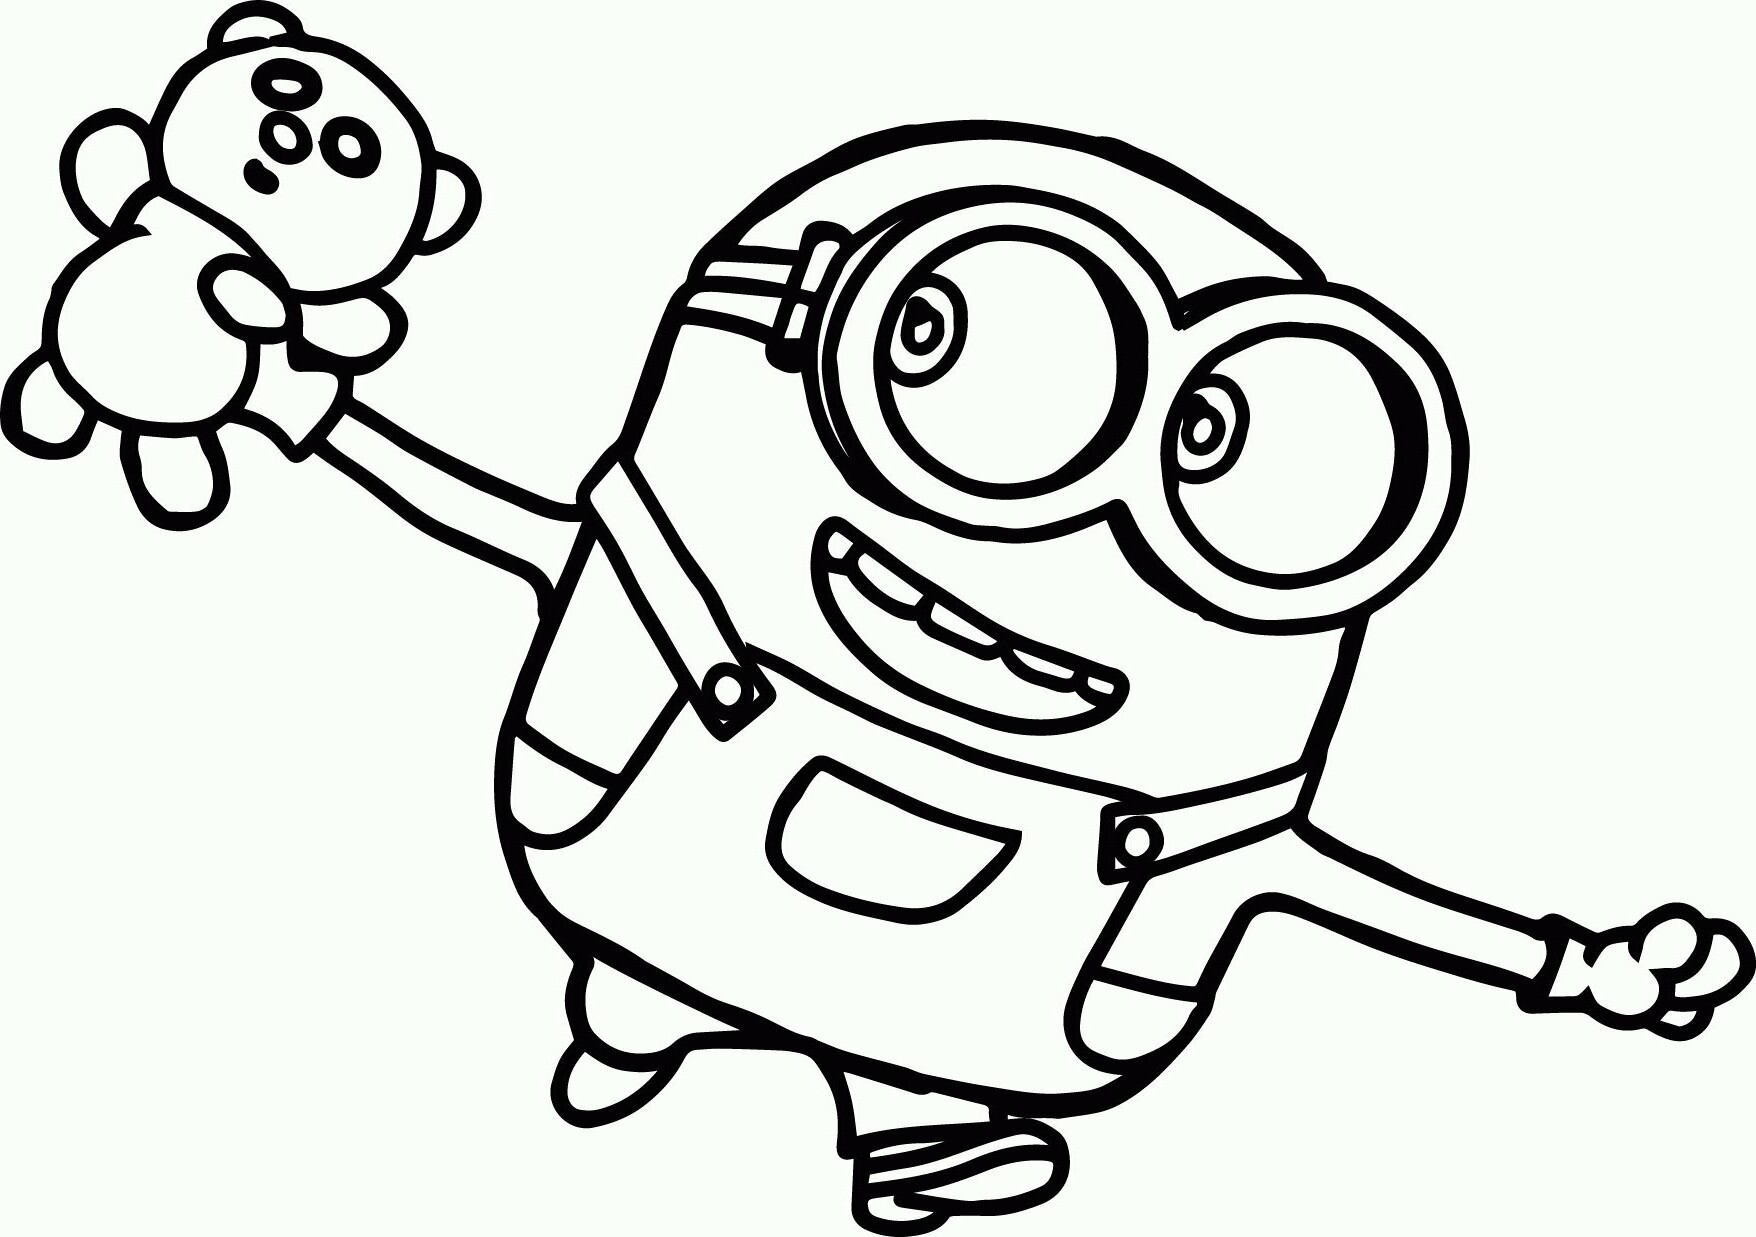 coloring : Free Minion Coloring Pages Beautiful Minion Bob With Teddy  Coloring Page Free Printable Free Minion Coloring Pages ~ queens